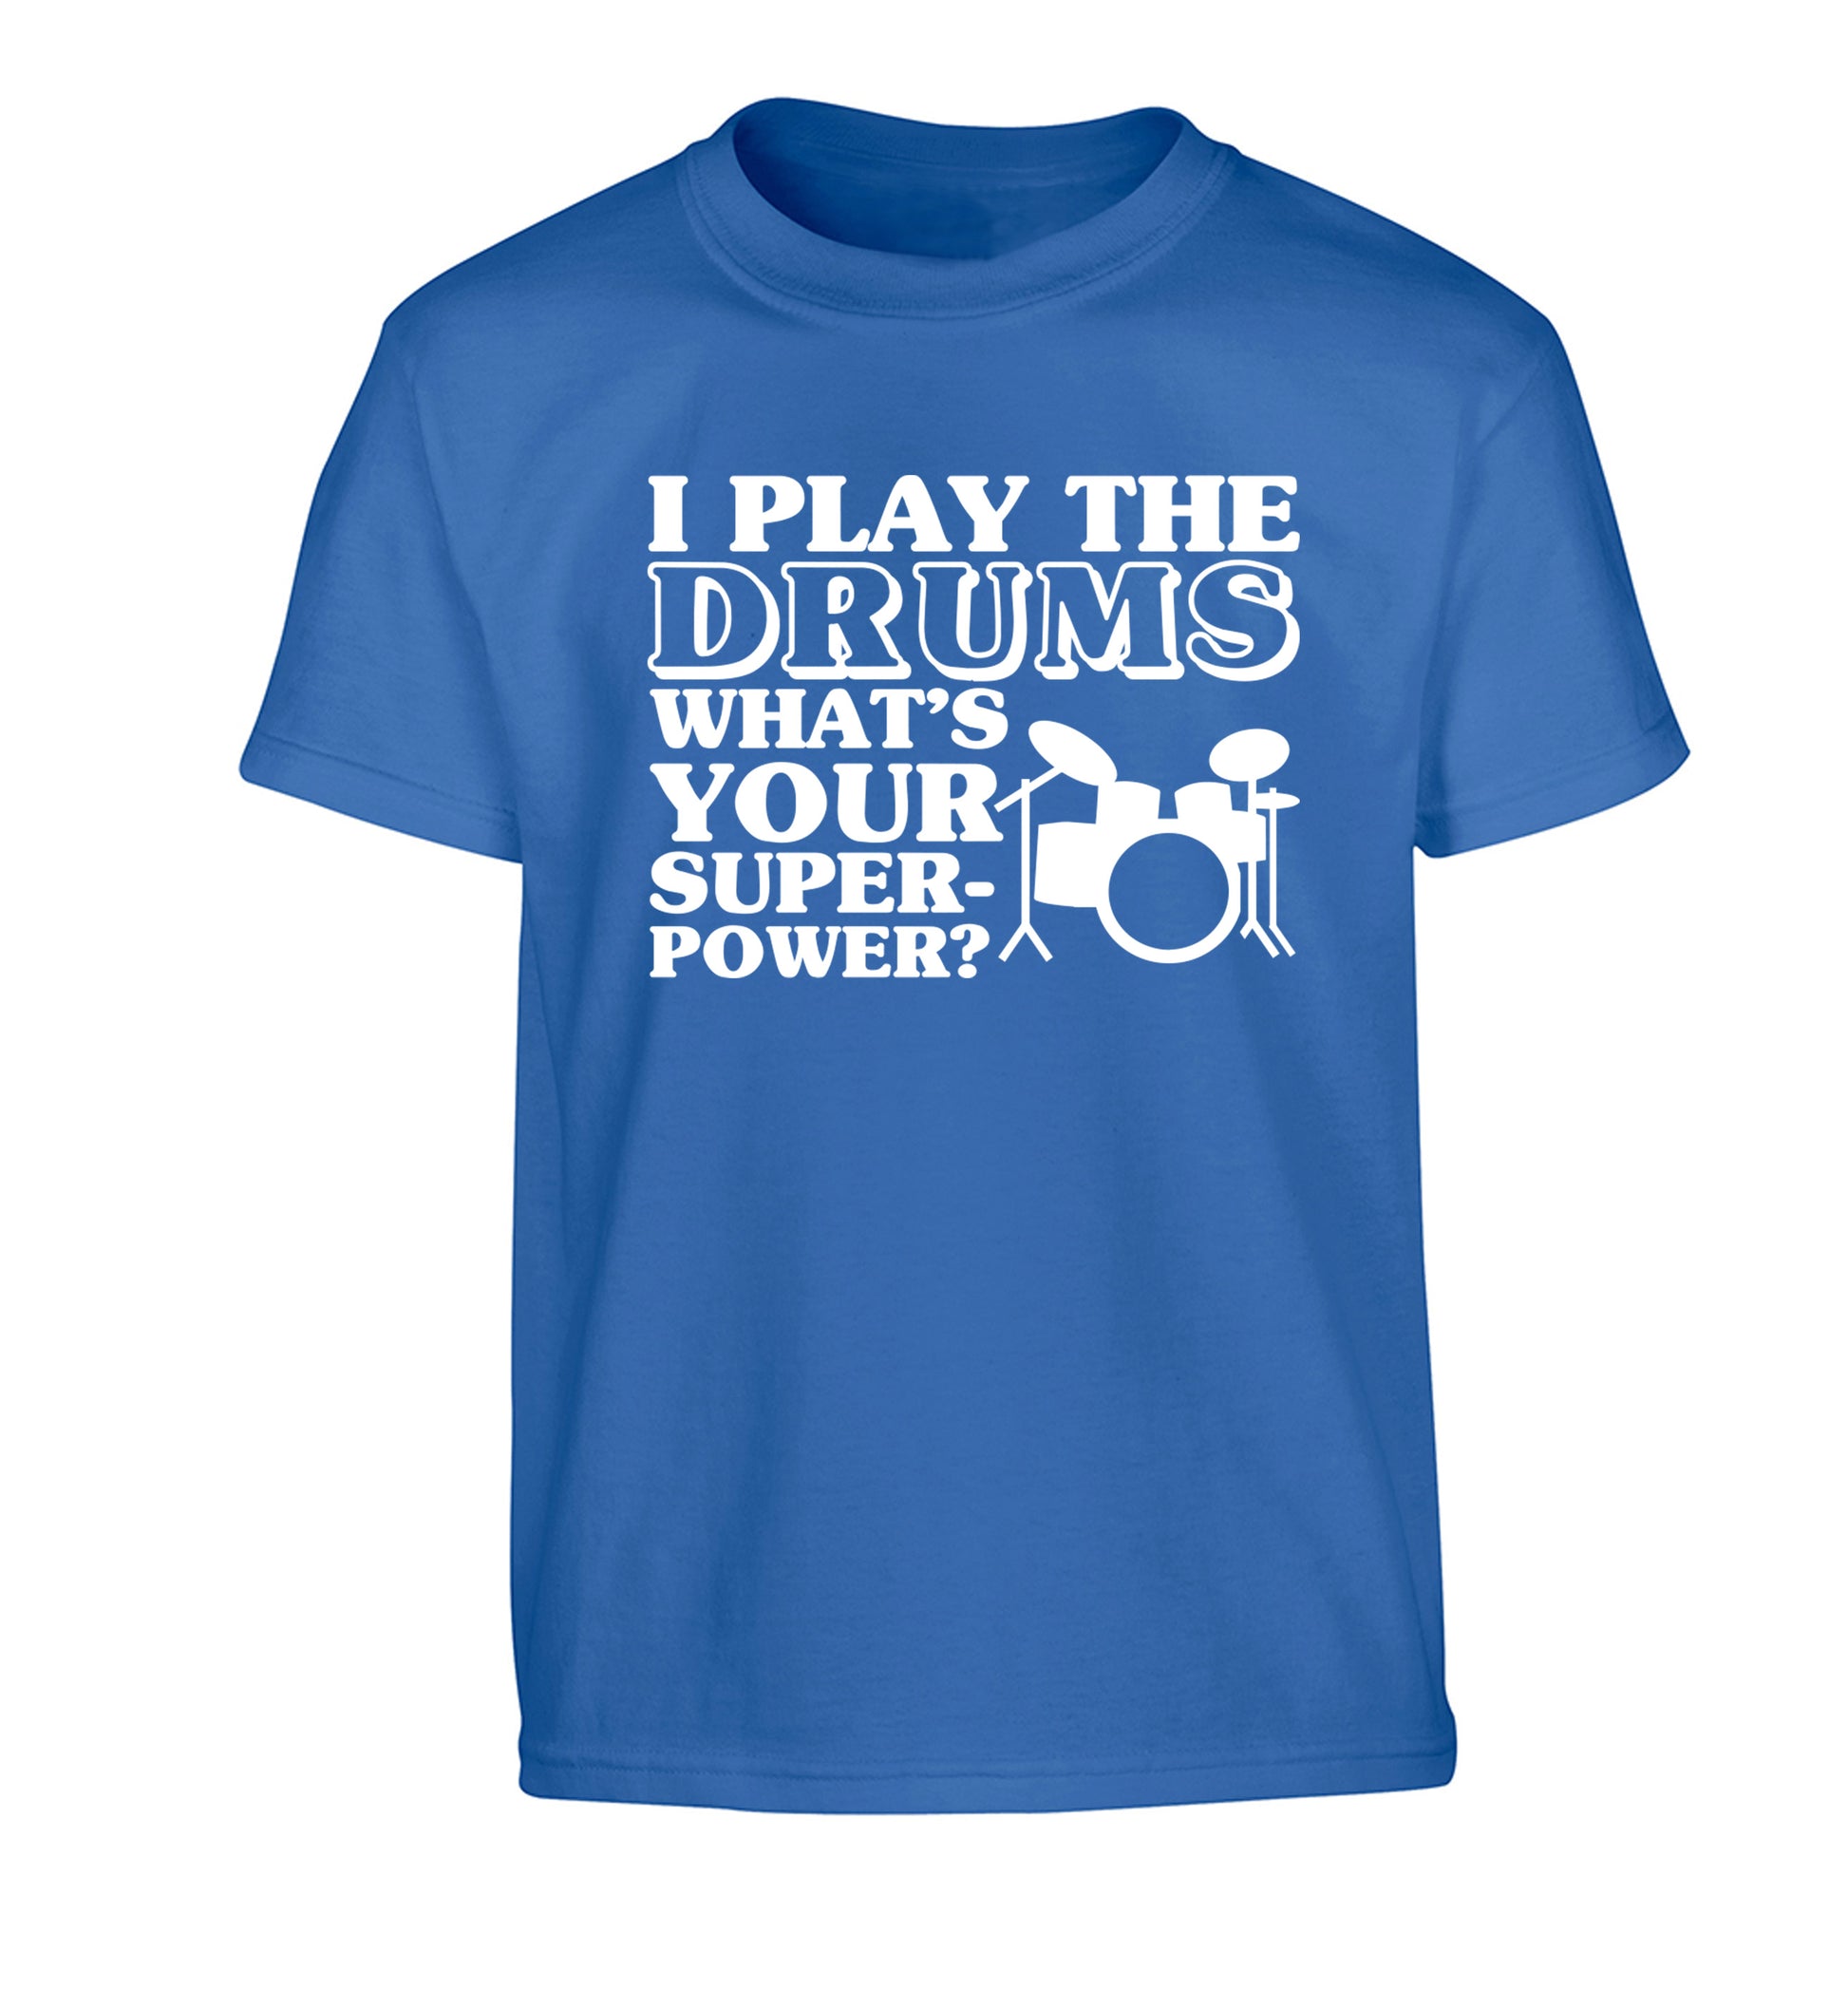 I play the drums what's your superpower? Children's blue Tshirt 12-14 Years